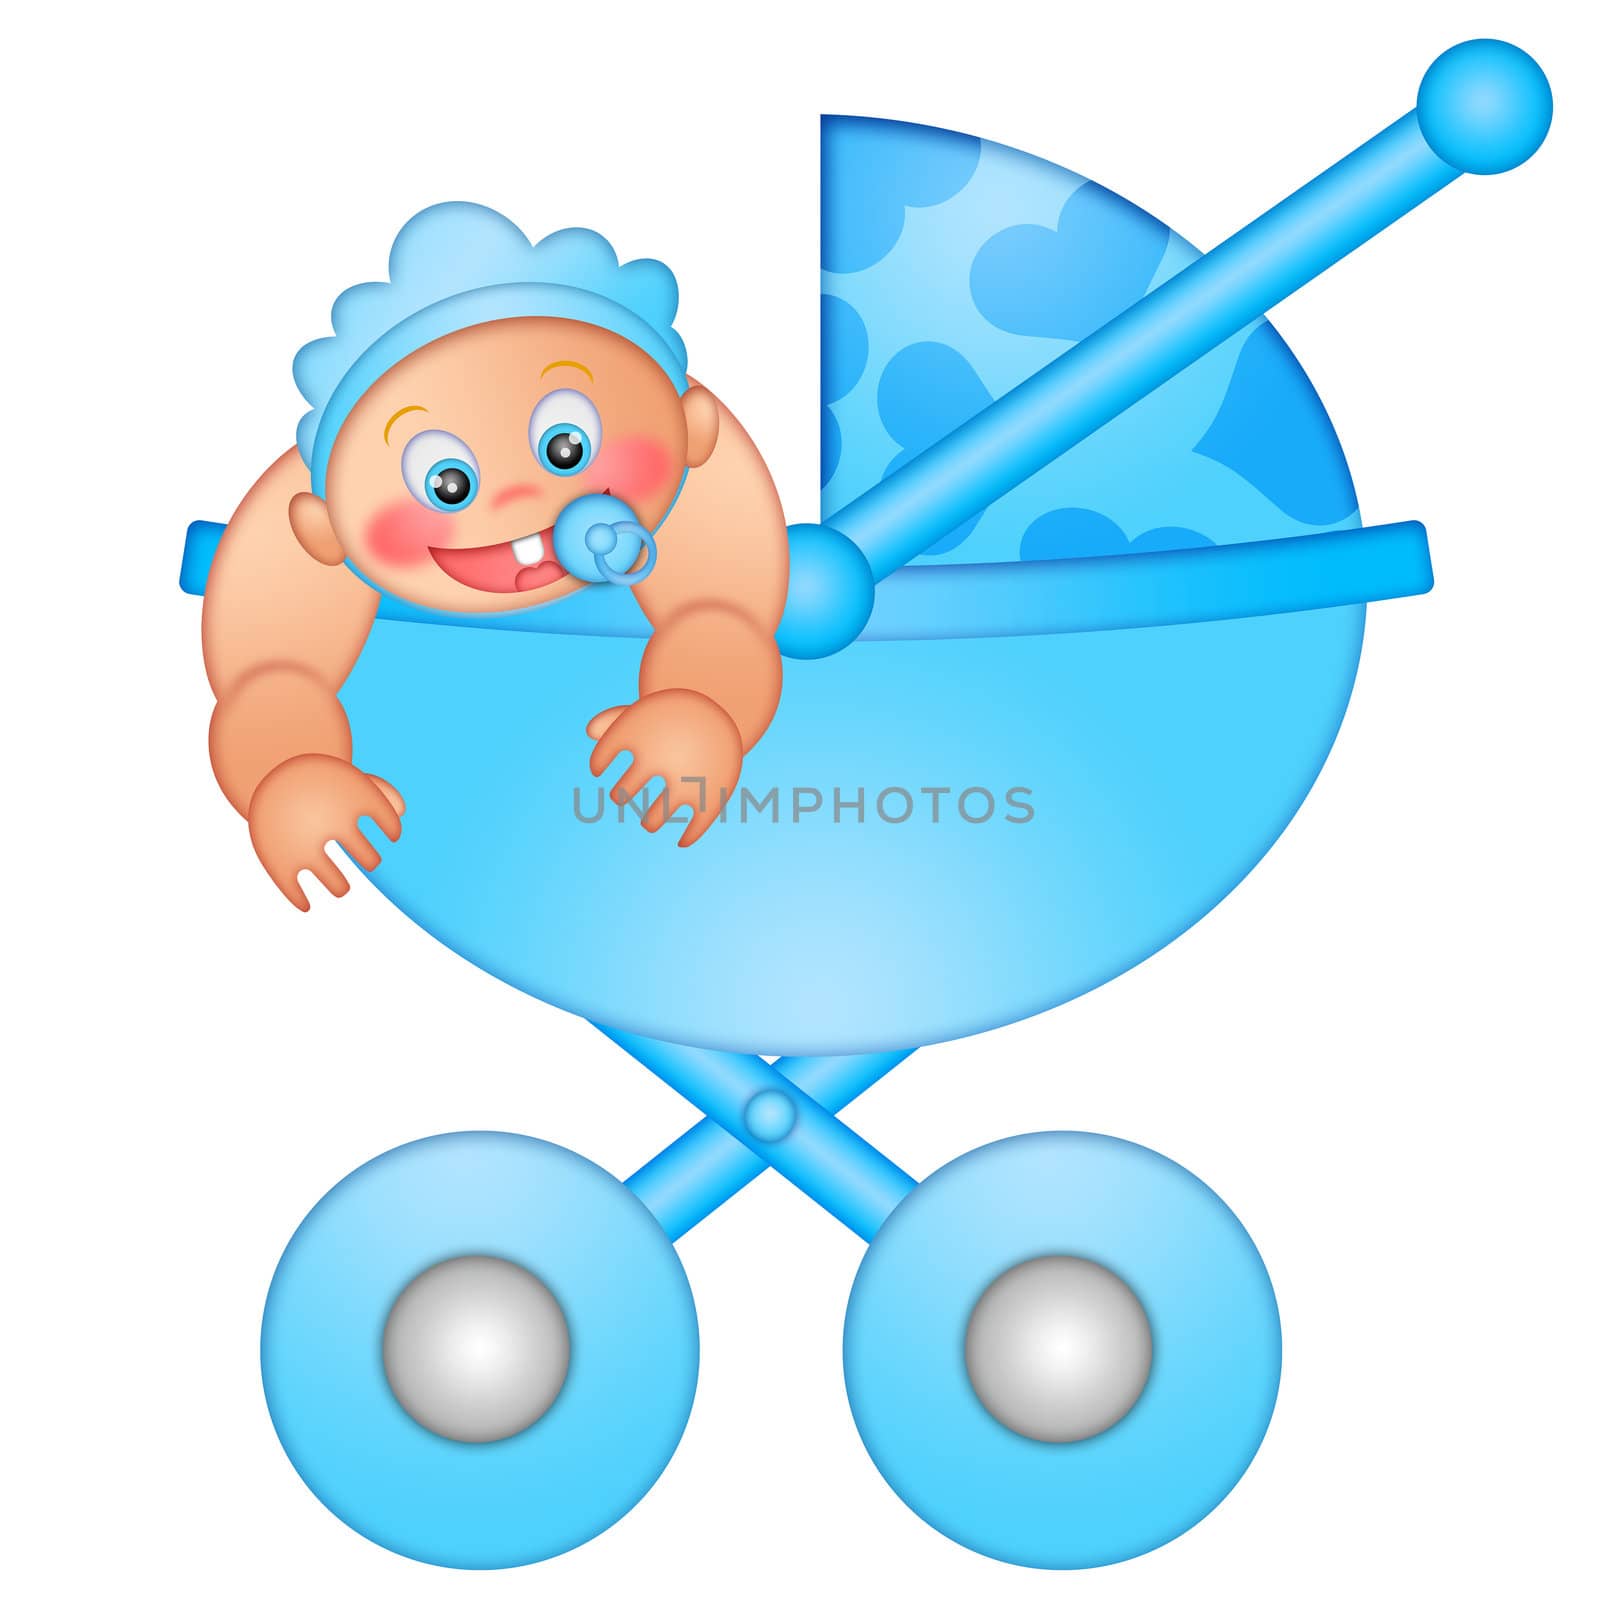 Baby Boy in Stroller Isolated on White Background Illustration